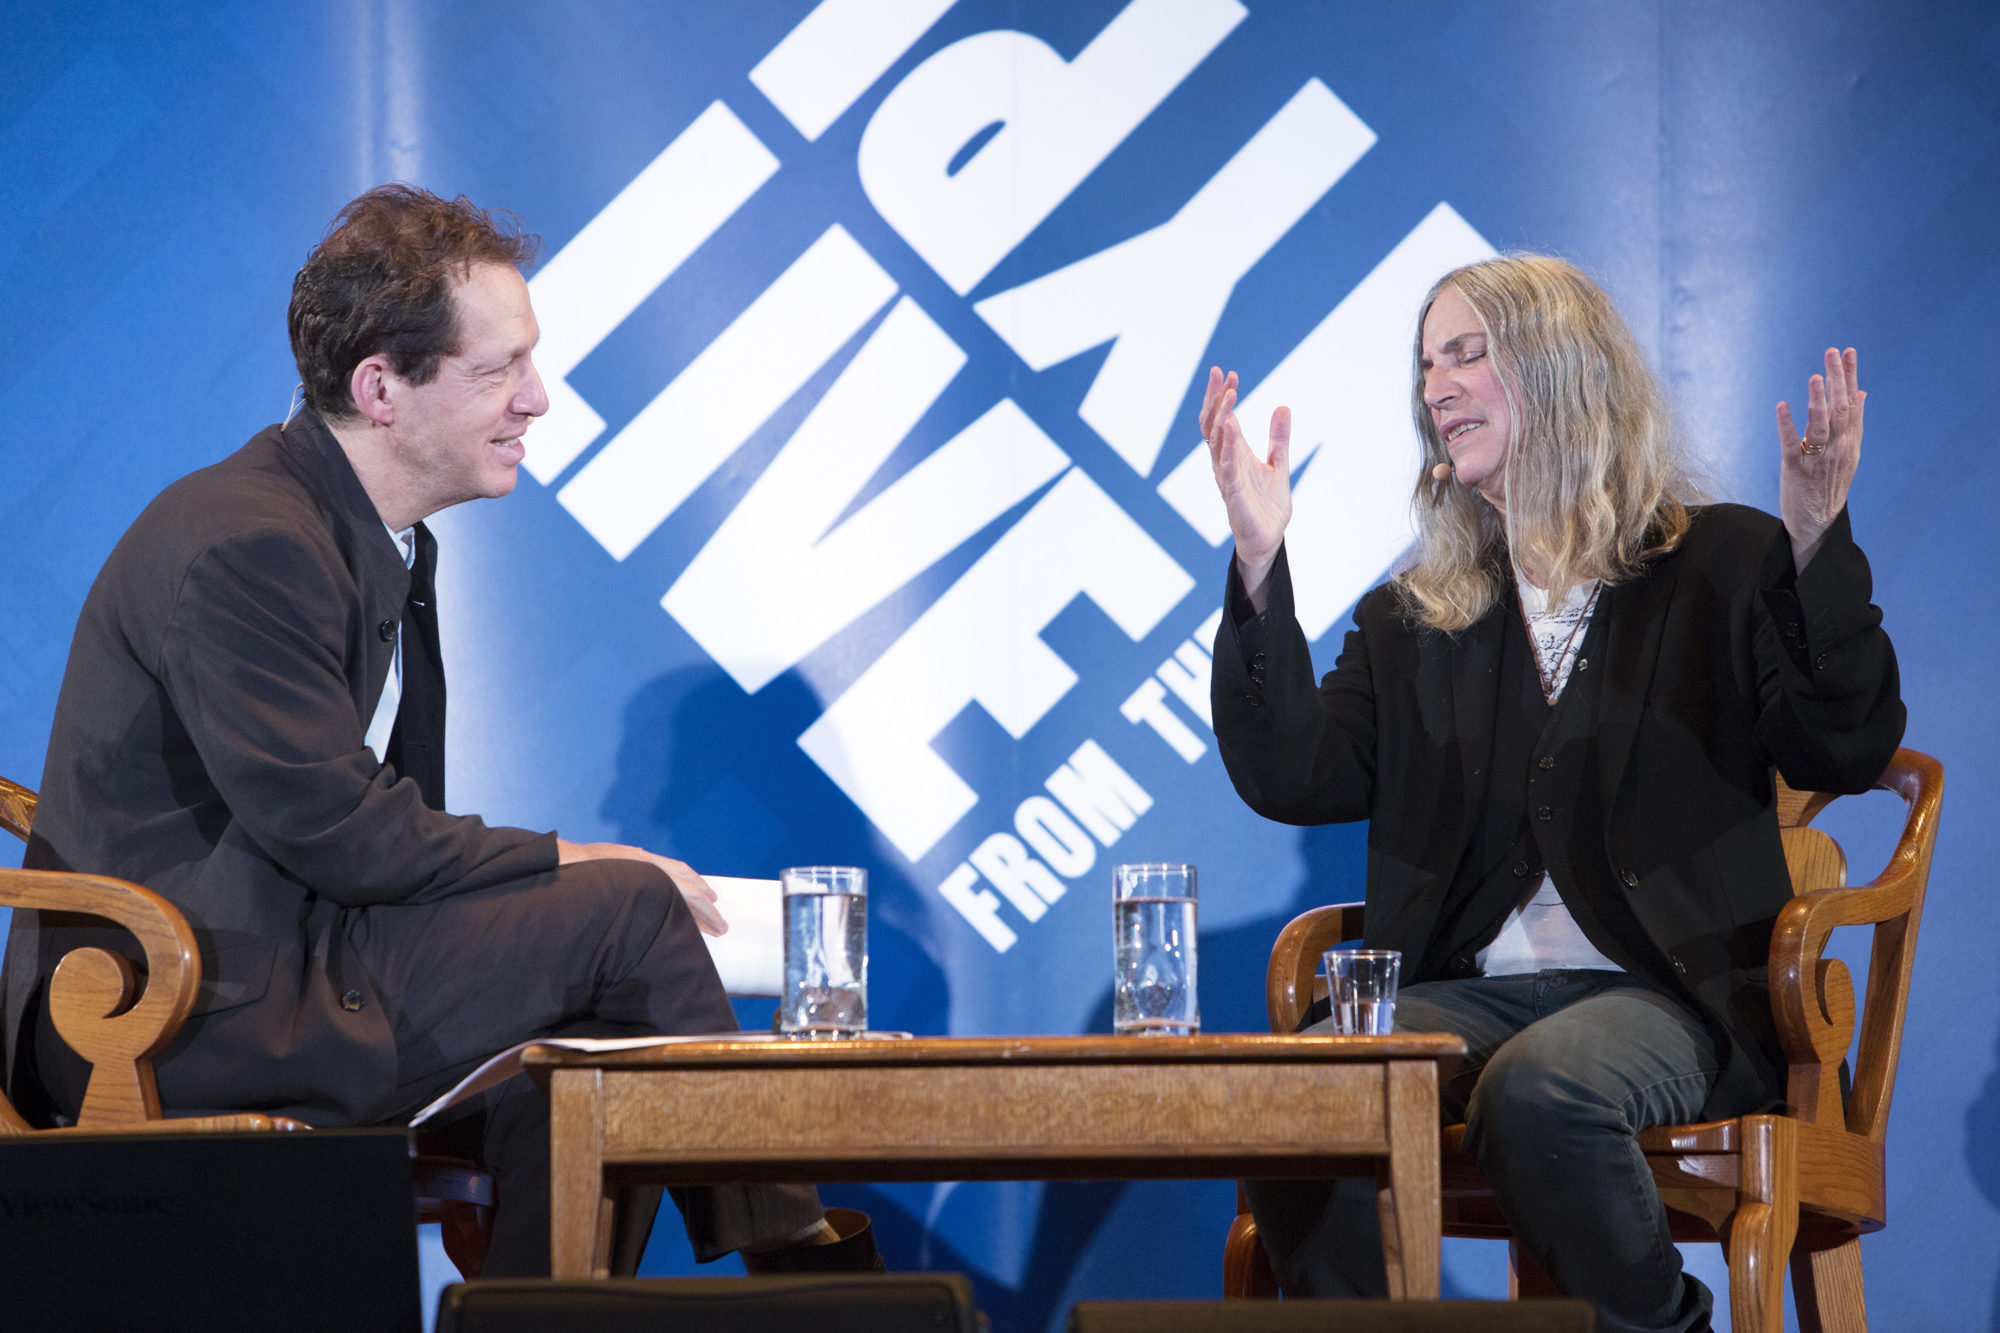 Paul Holdengråber sitting on stage along with Patti Smith as he interviews her.